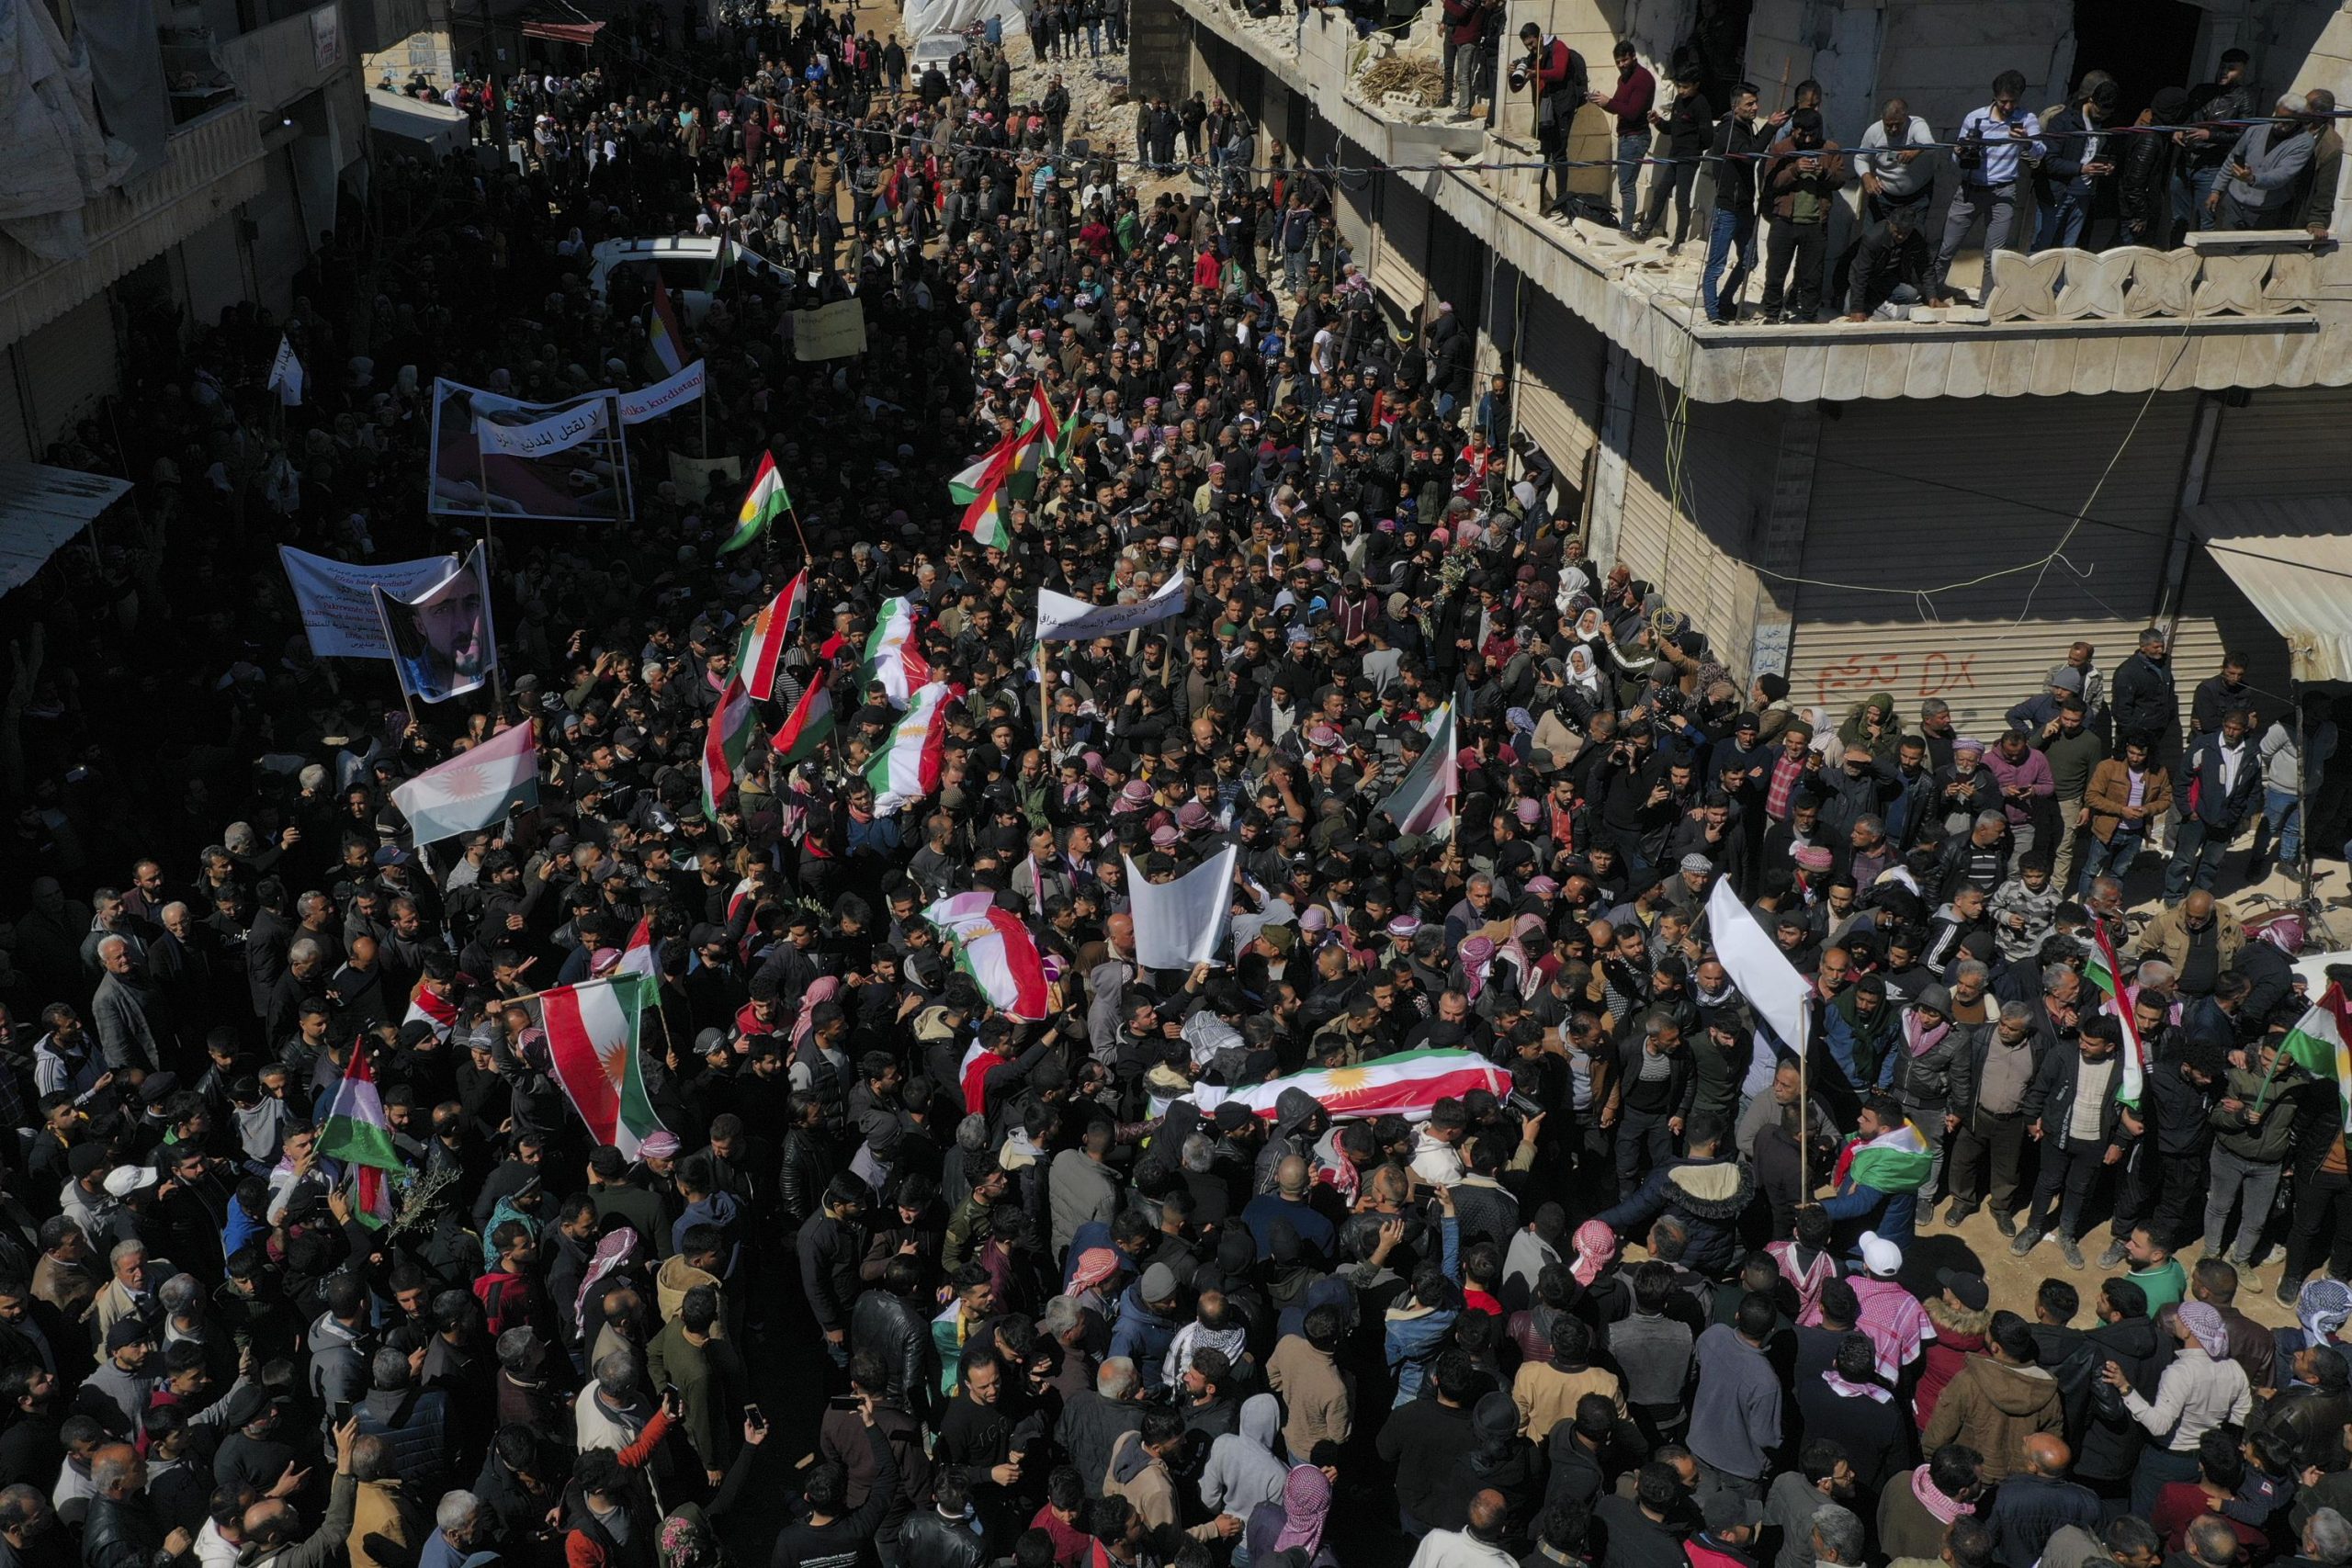 Killing of Kurds in northern Syria sparks protests, tensions 4